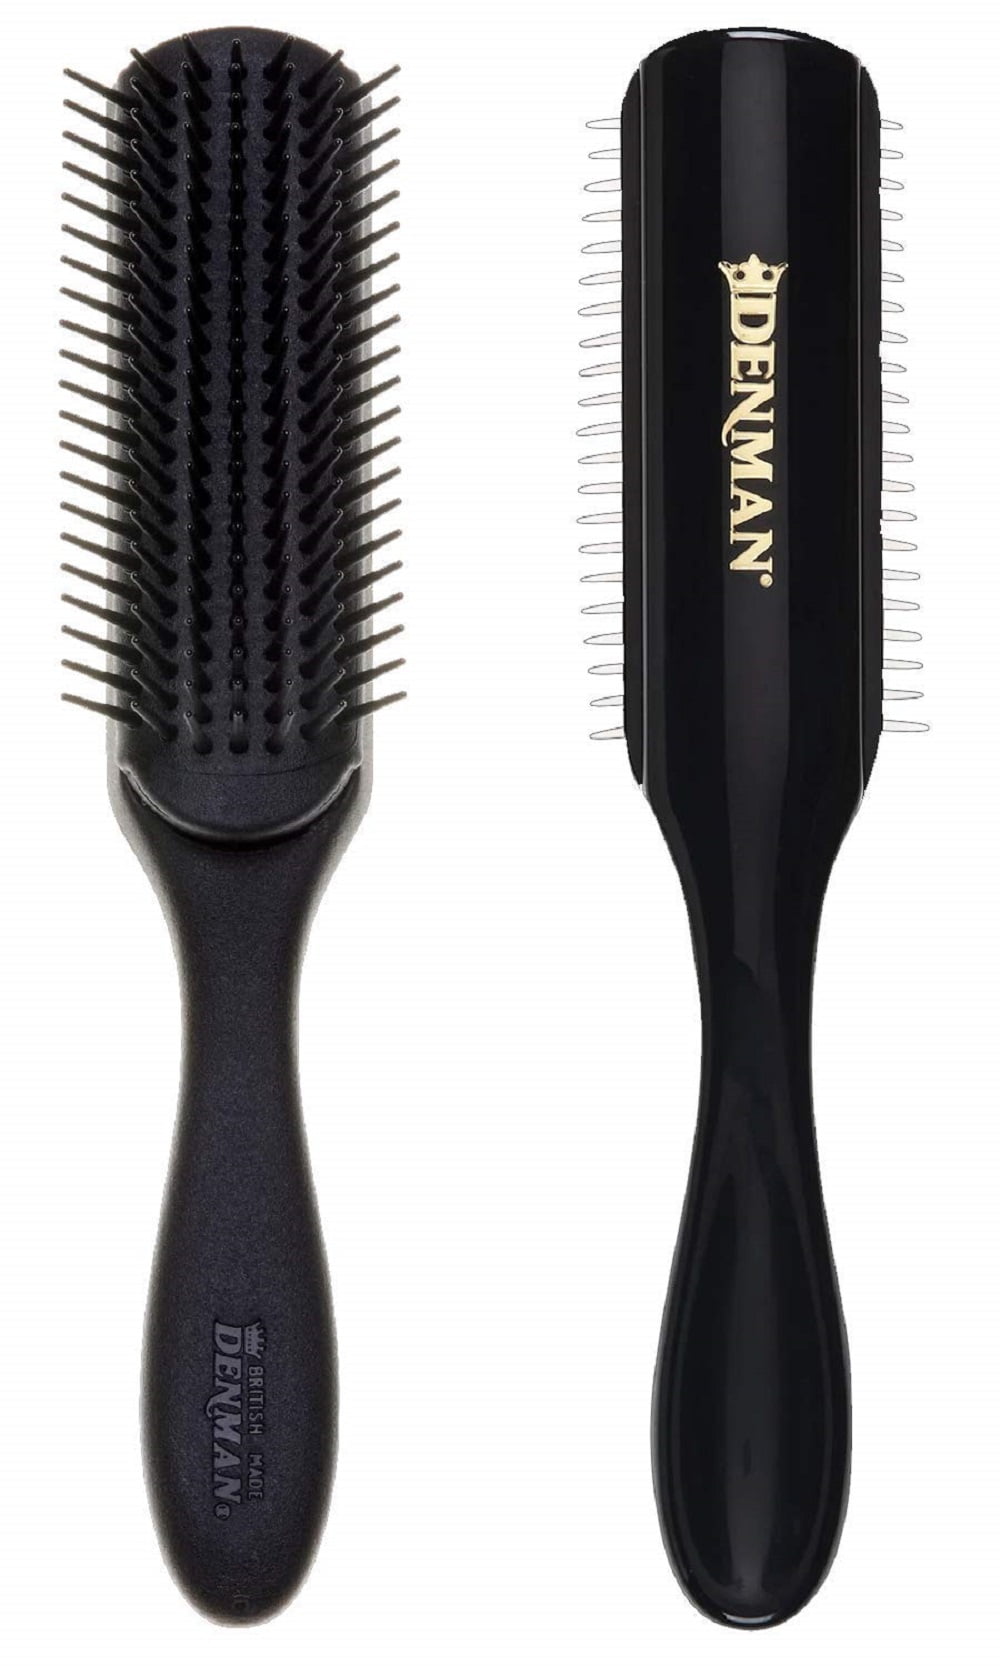 Denman Original Styler, 7 Row for Detangling, Blow-drying, Styling &  Smoothing the Hair, All Black D3 